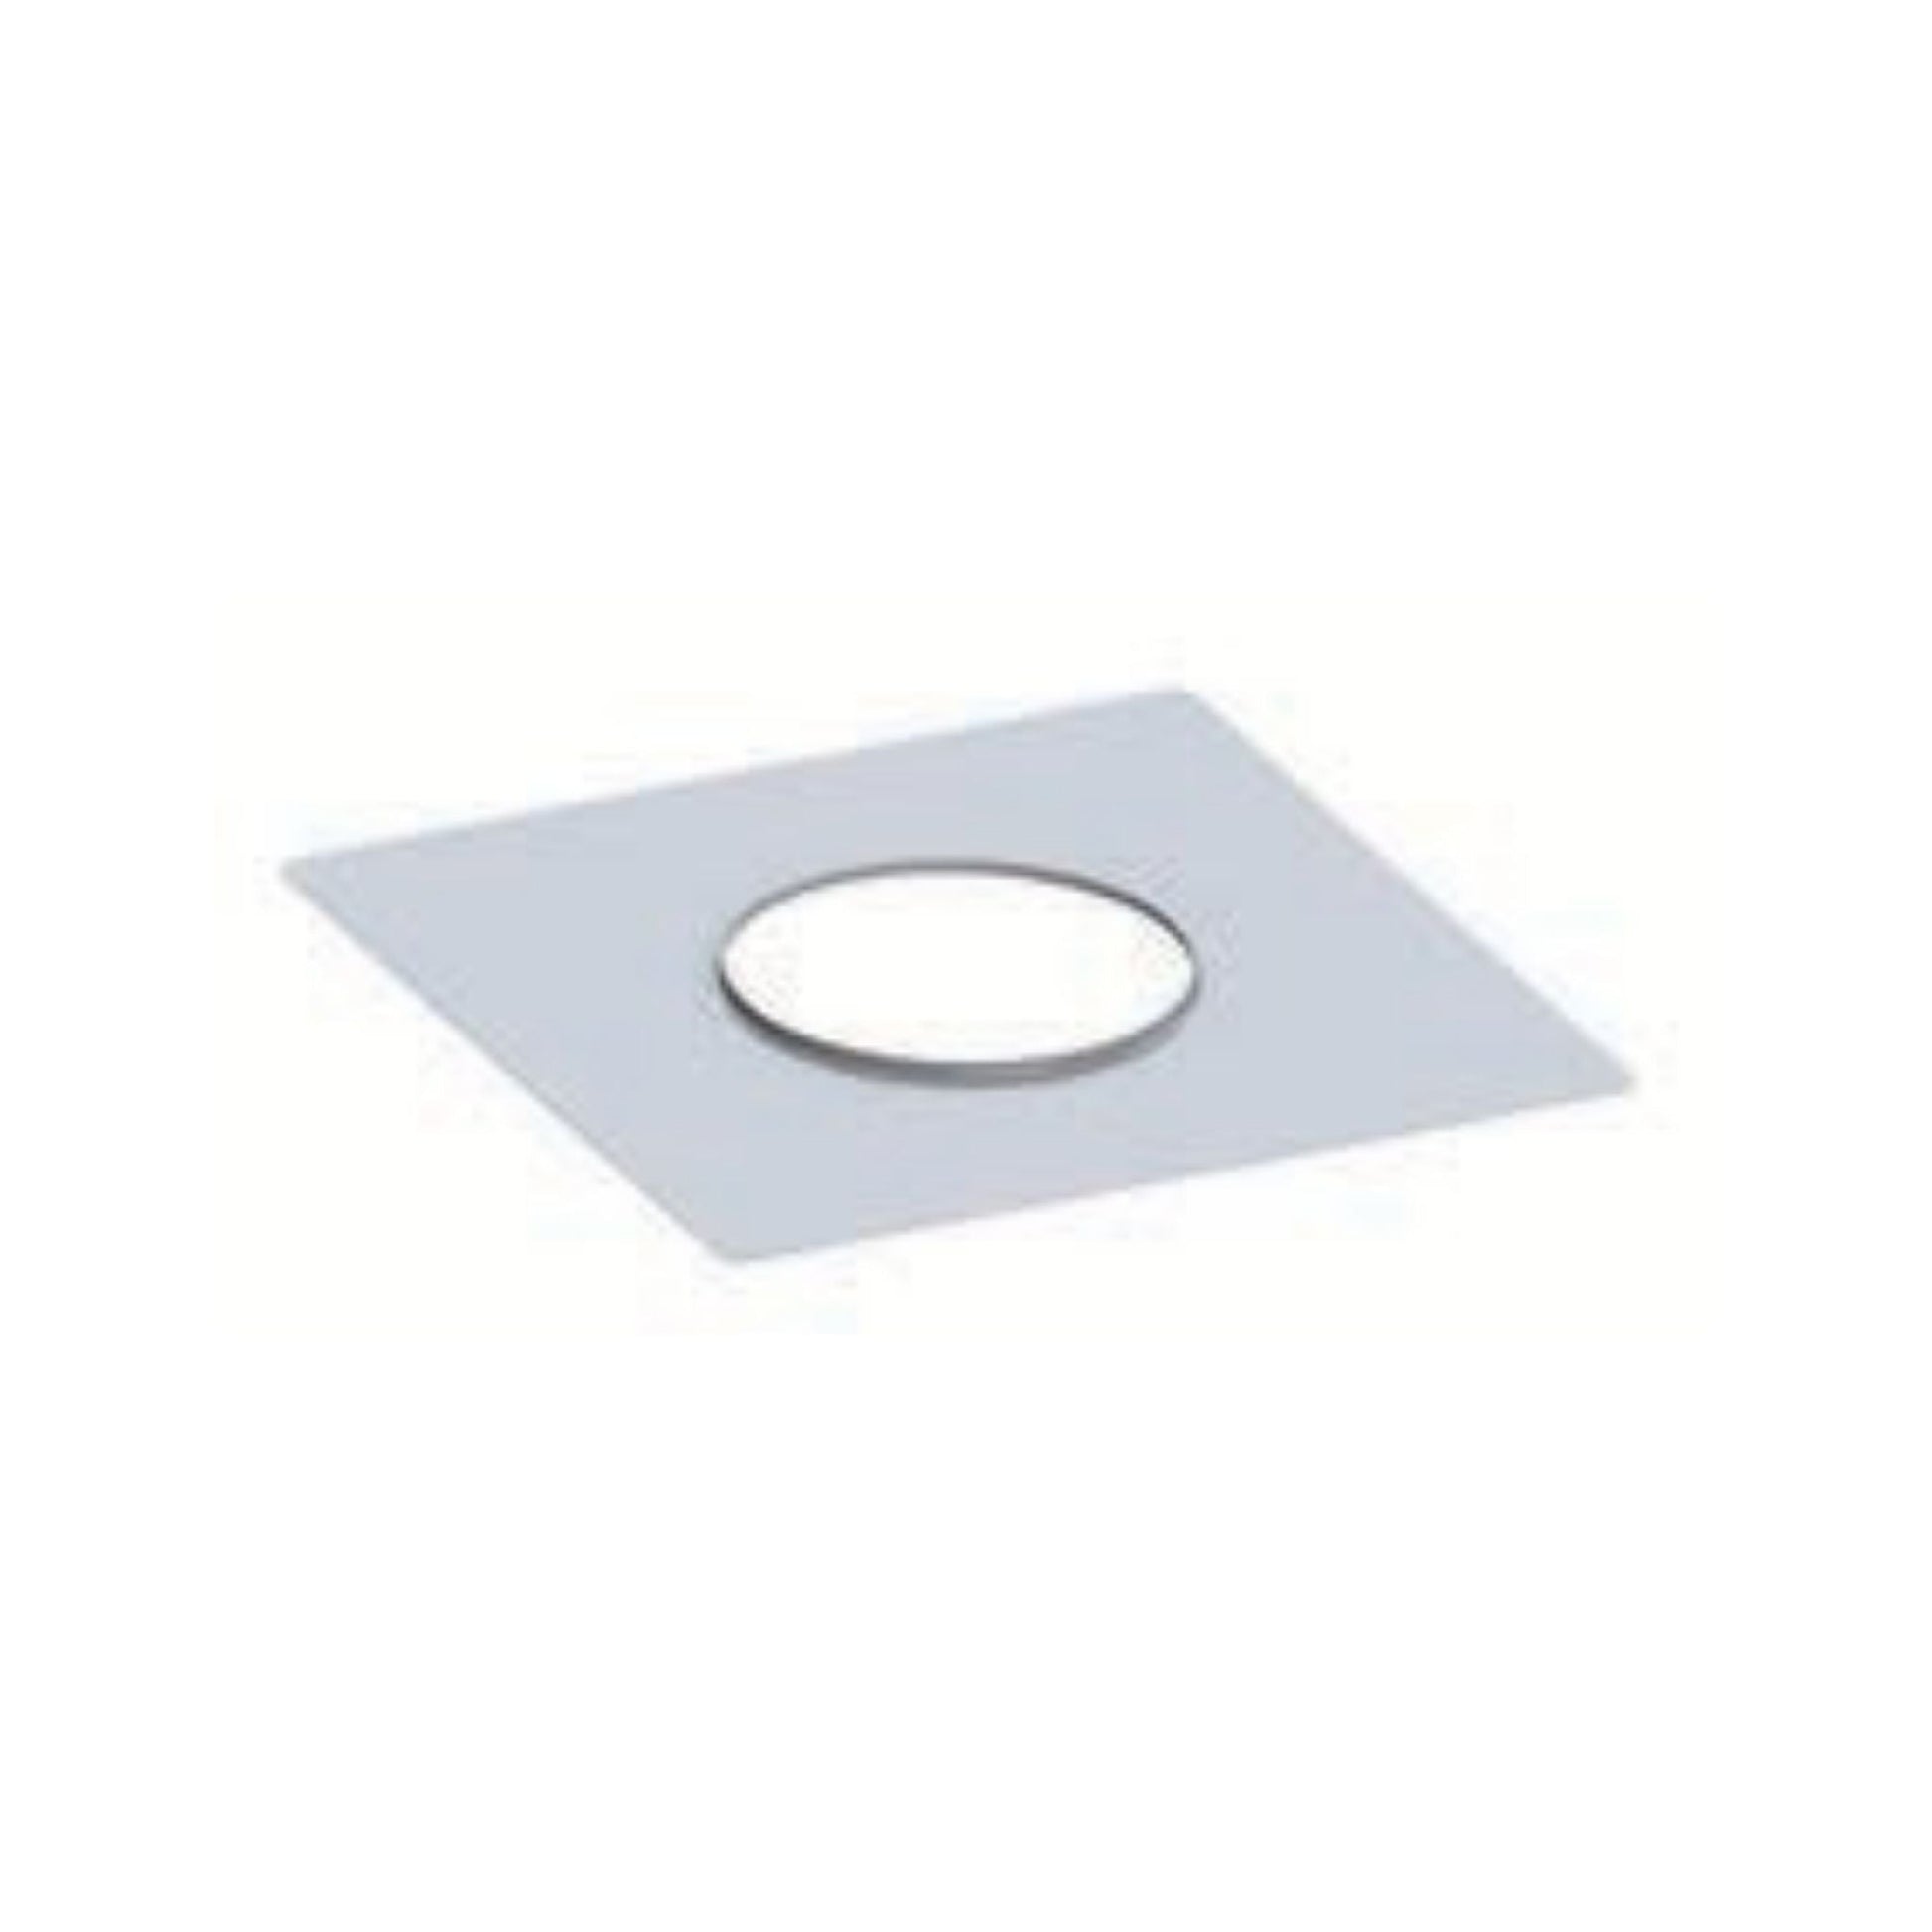 DuraVent FasNSeal Flex 9" Stainless Steel Top Cover Plate